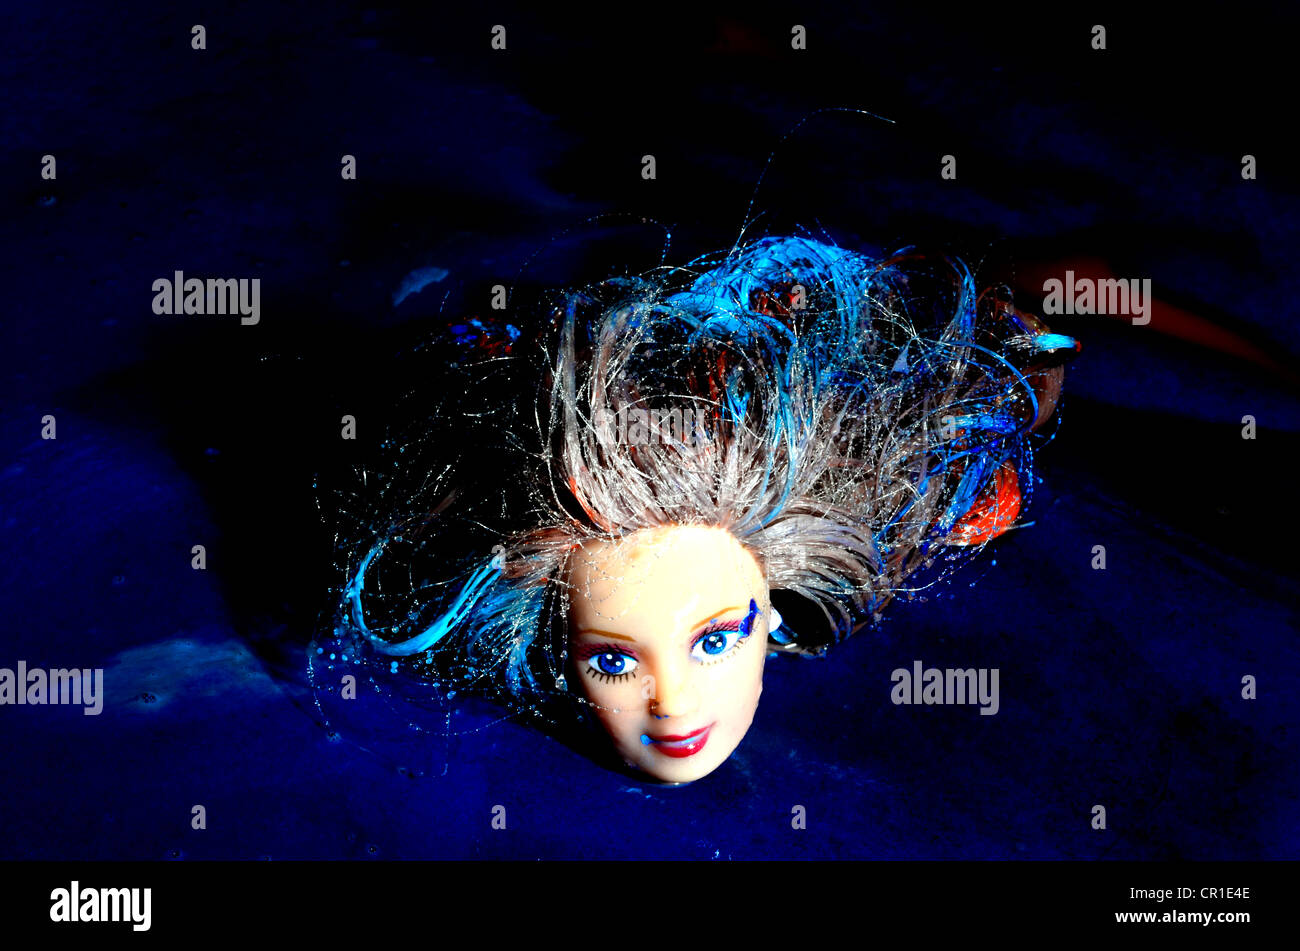 dolls head with blue and red paint Stock Photo